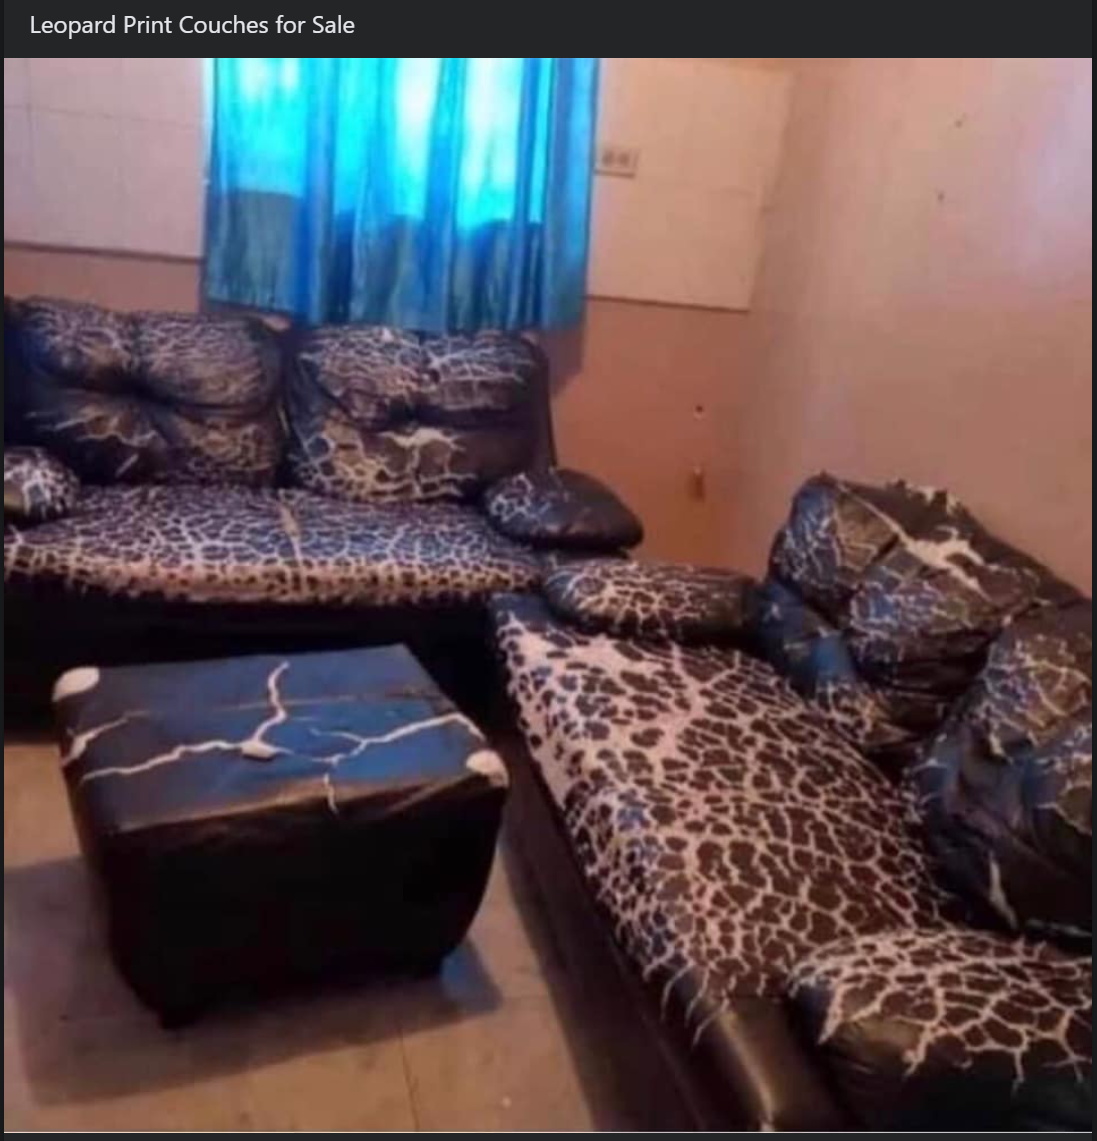 Leopard Print Couches for sale Blank Meme Template